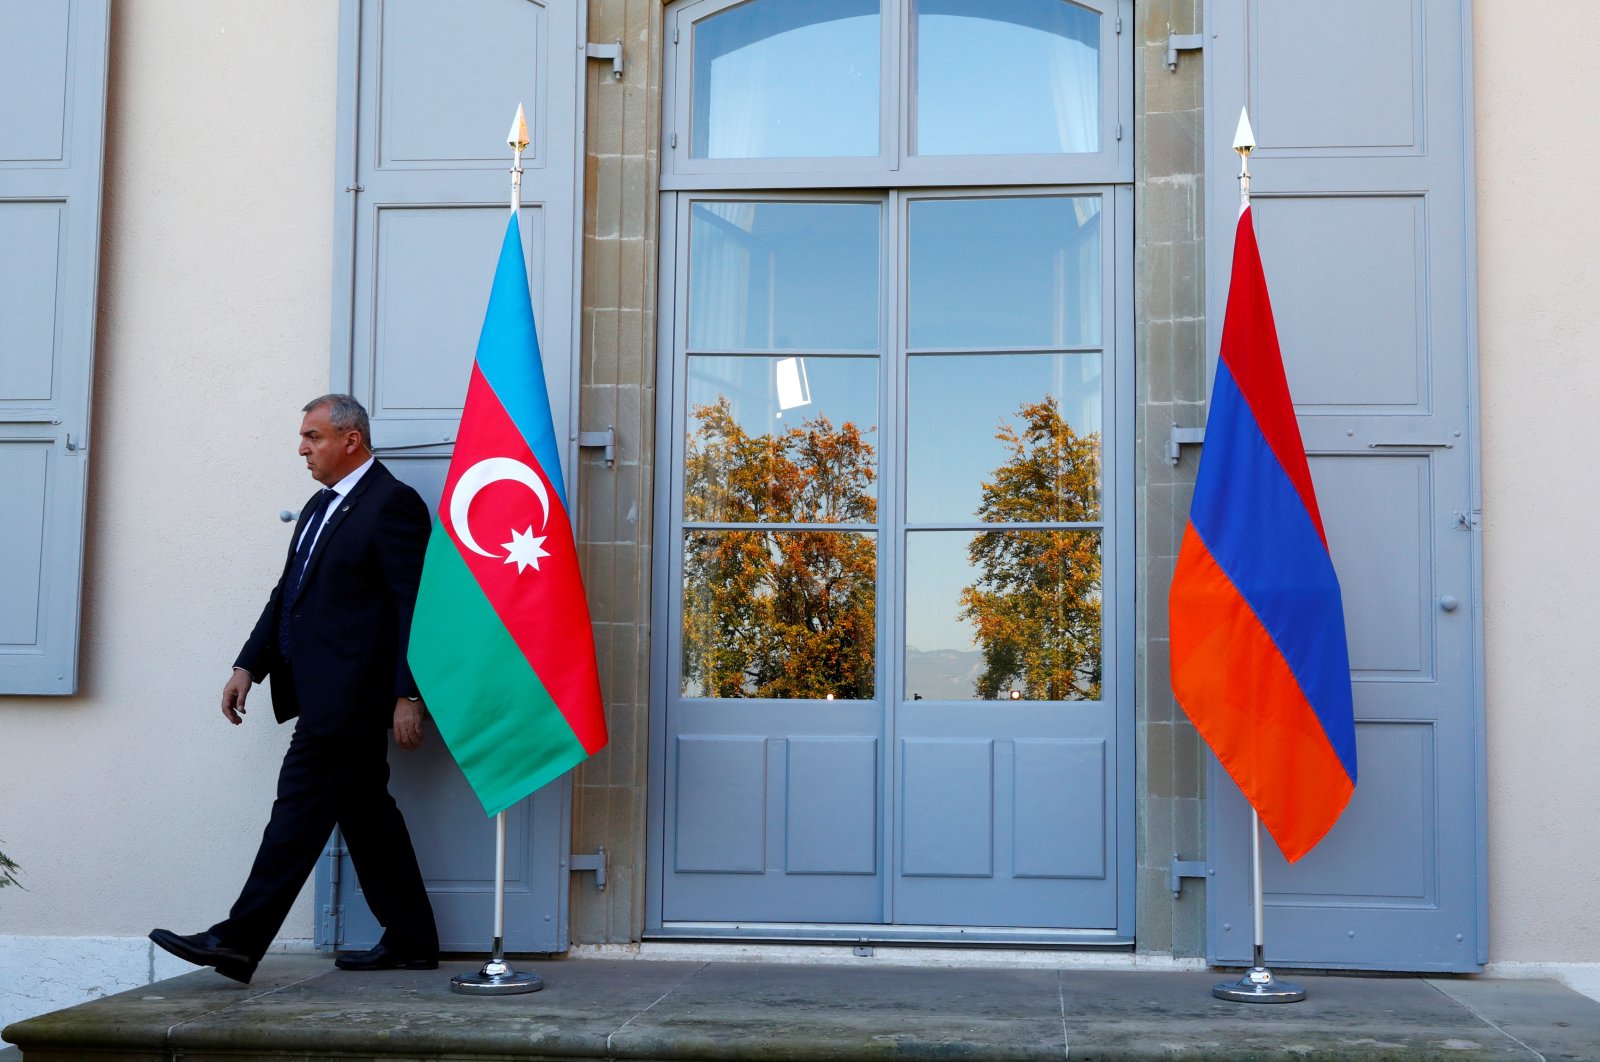 A security guard walks past an Azerbaijan (L) and Armenian flag at the opening of talks of the Organization for Security and Co-operation in Europe (OSCE) Minsk group in Geneva, Switzerland, Oct. 16, 2017. (Reuters Photo)